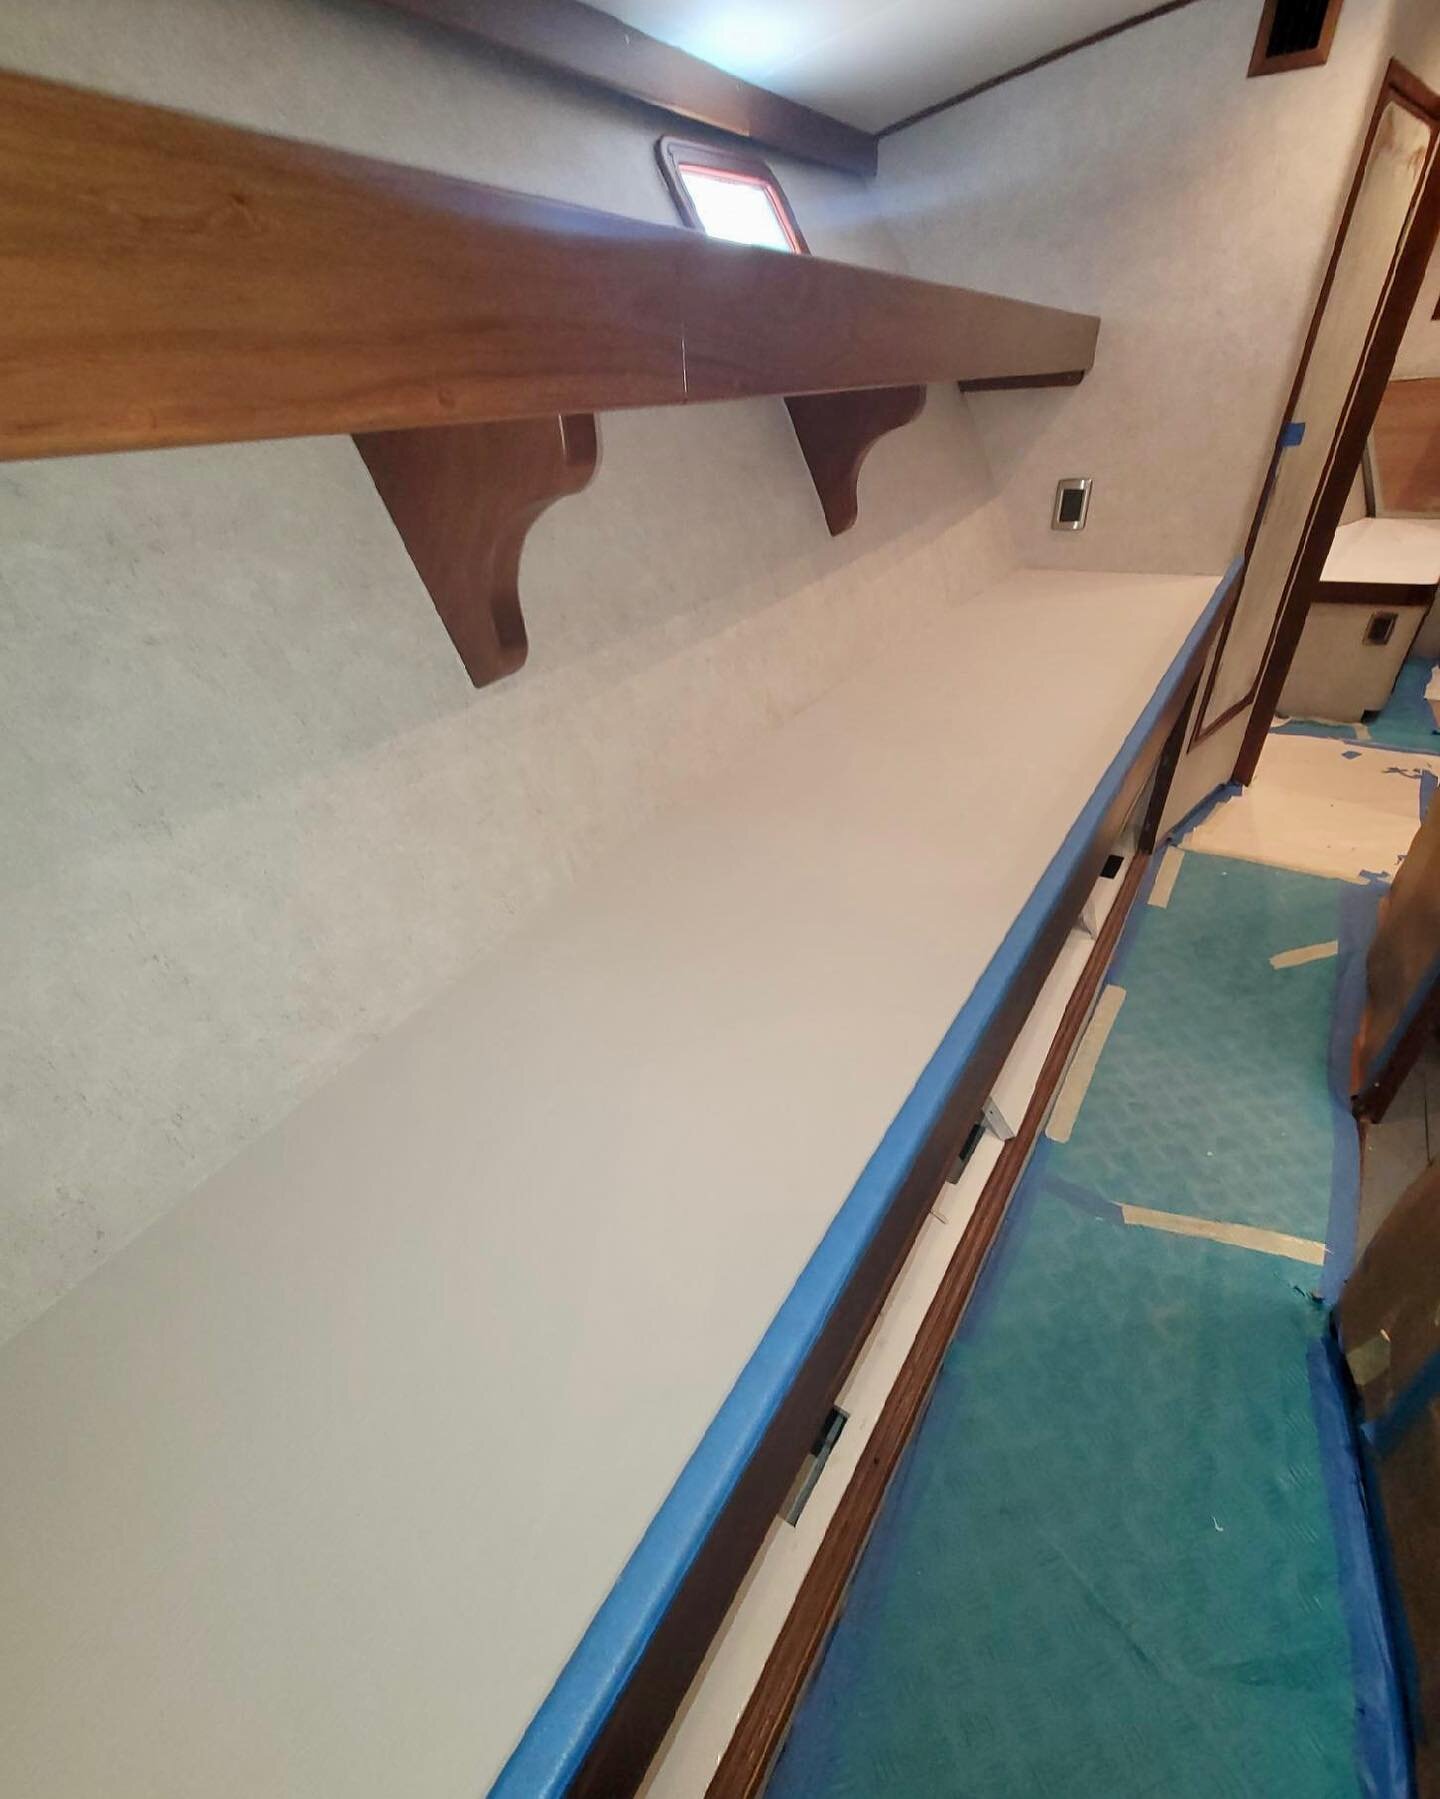 It was time for a remodel check out this Sportfish&rsquo;s interior storage areas.
3mm pearl &amp; silver cloud. 
@gatorstepfs @gatorstepit 
#elitemarineproducts #gatorstep #notjust #boatflooring #gatorstepflooring #remodel #makeityours